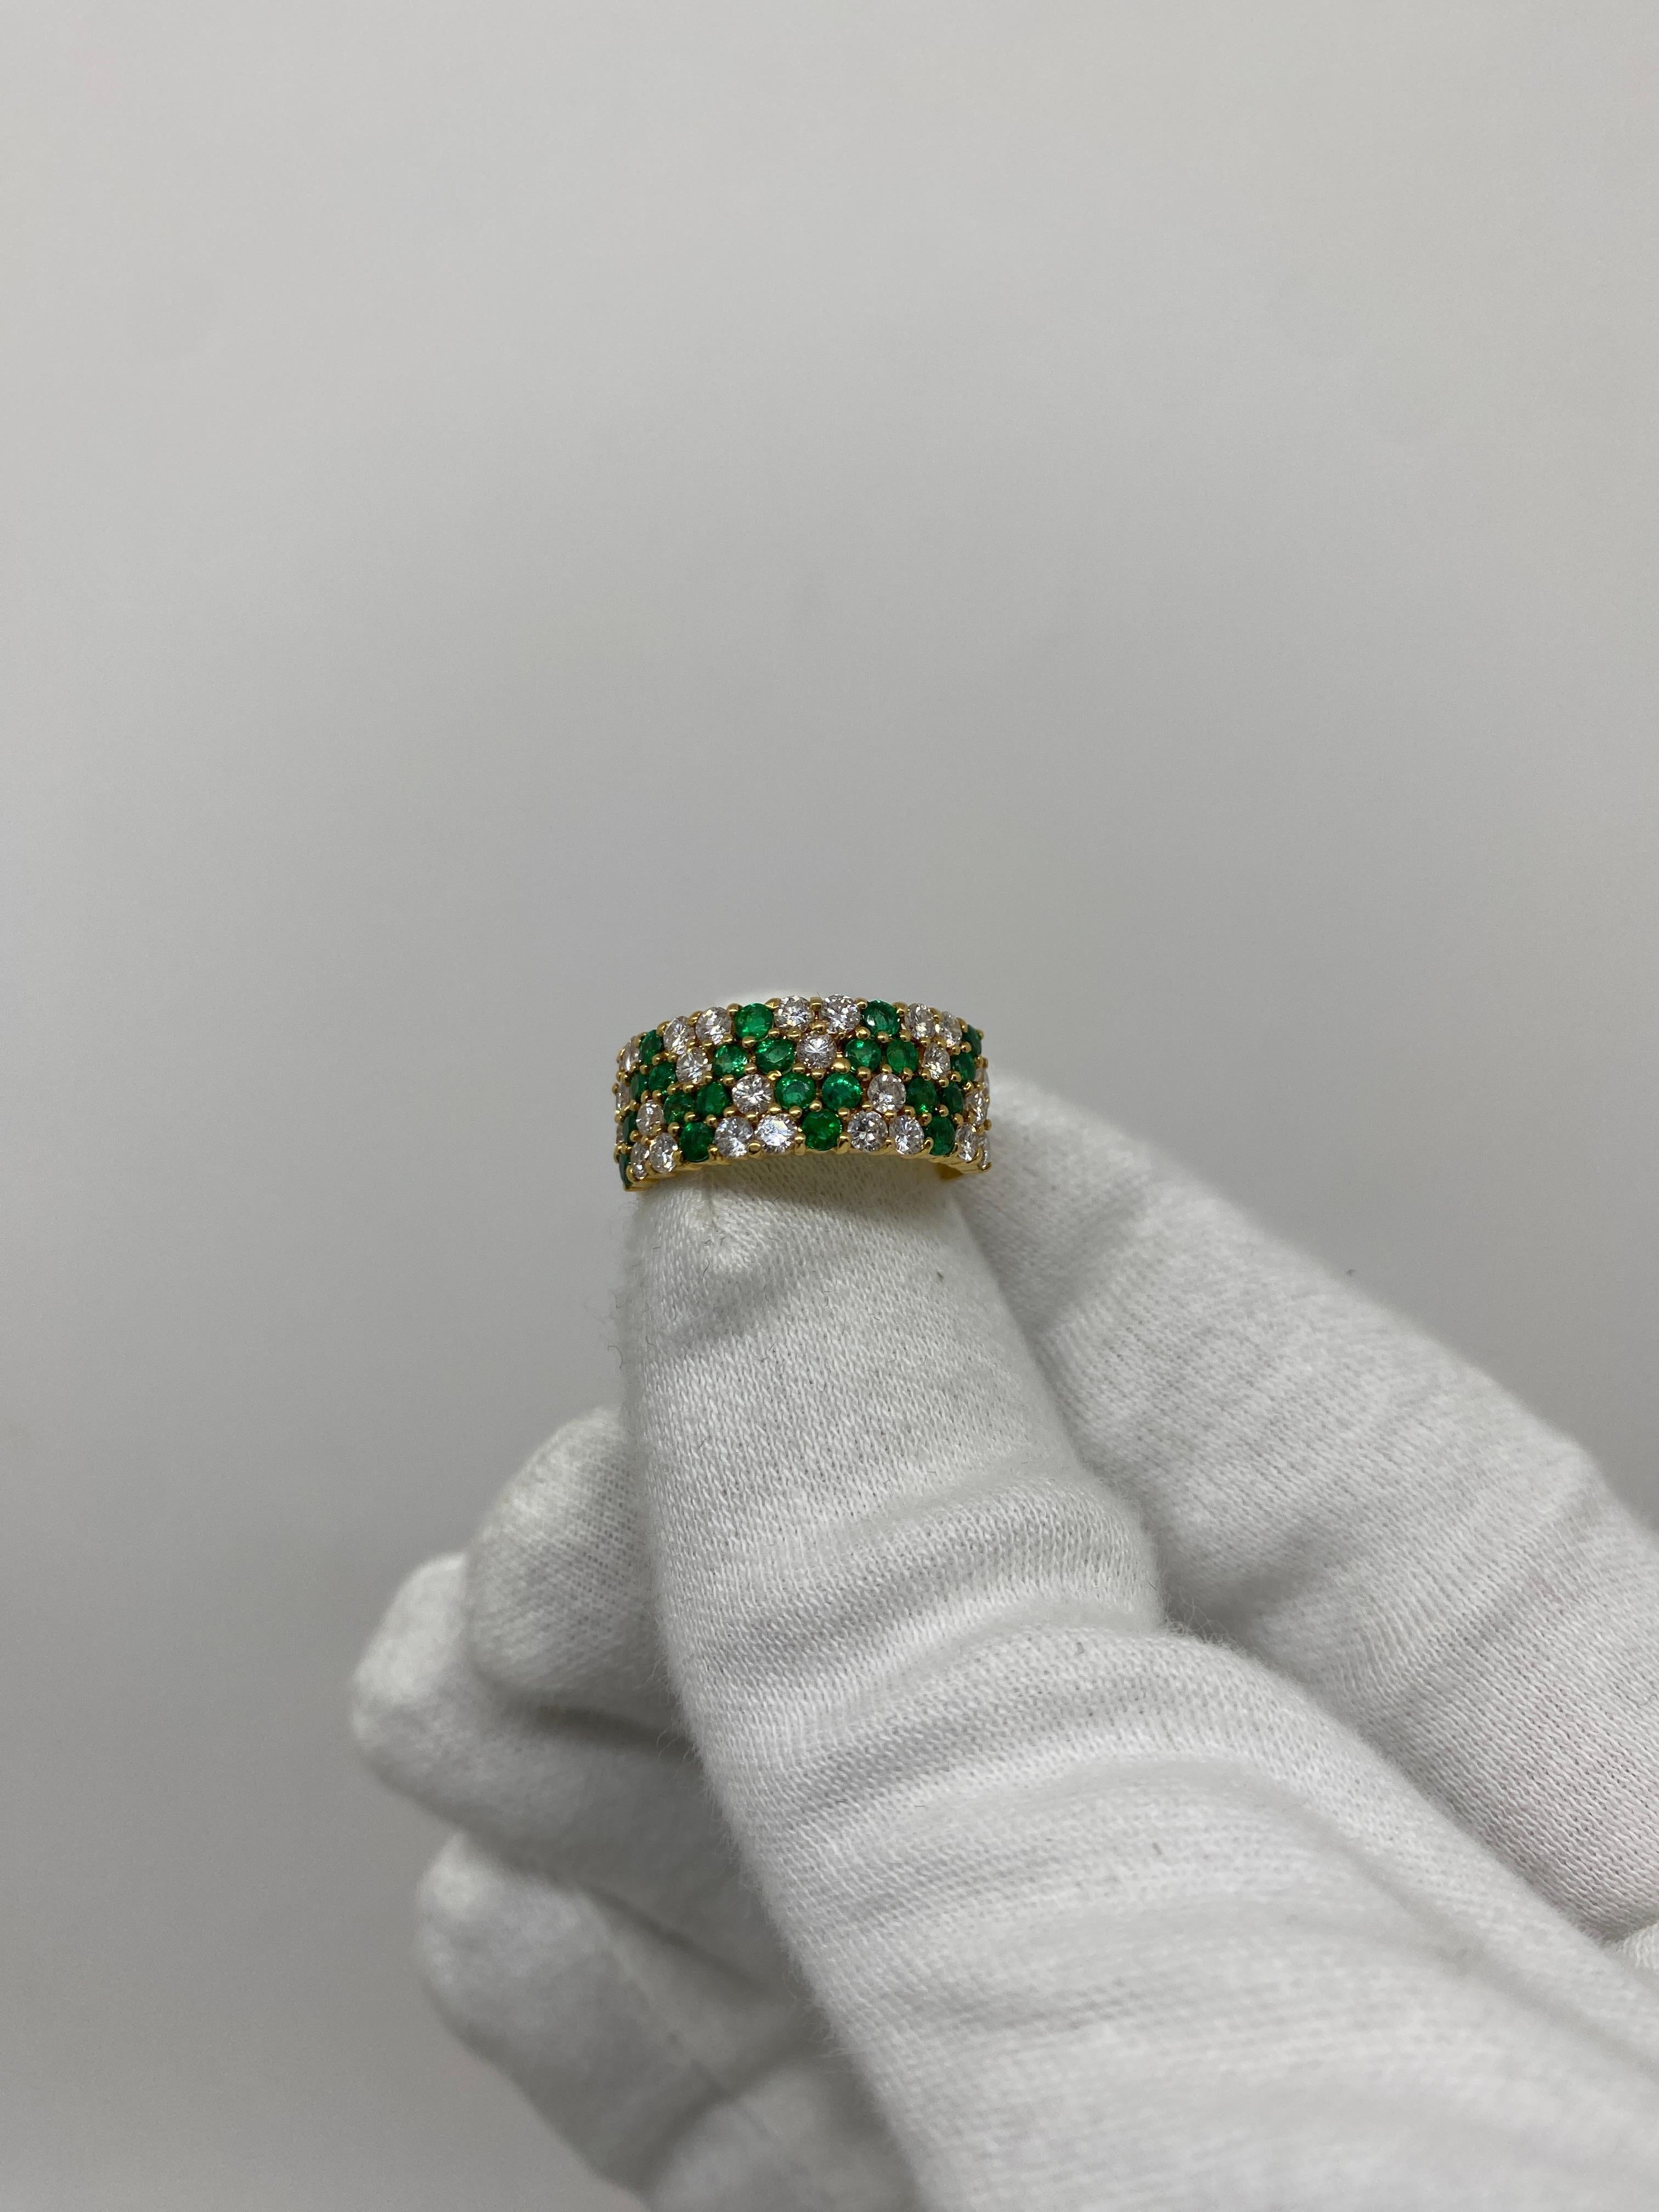 Band ring made of 18kt yellow gold with natural brilliant-cut diamonds and natural brilliant-cut emeralds

Welcome to our jewelry collection, where every piece tells a story of timeless elegance and unparalleled craftsmanship. As a family-run